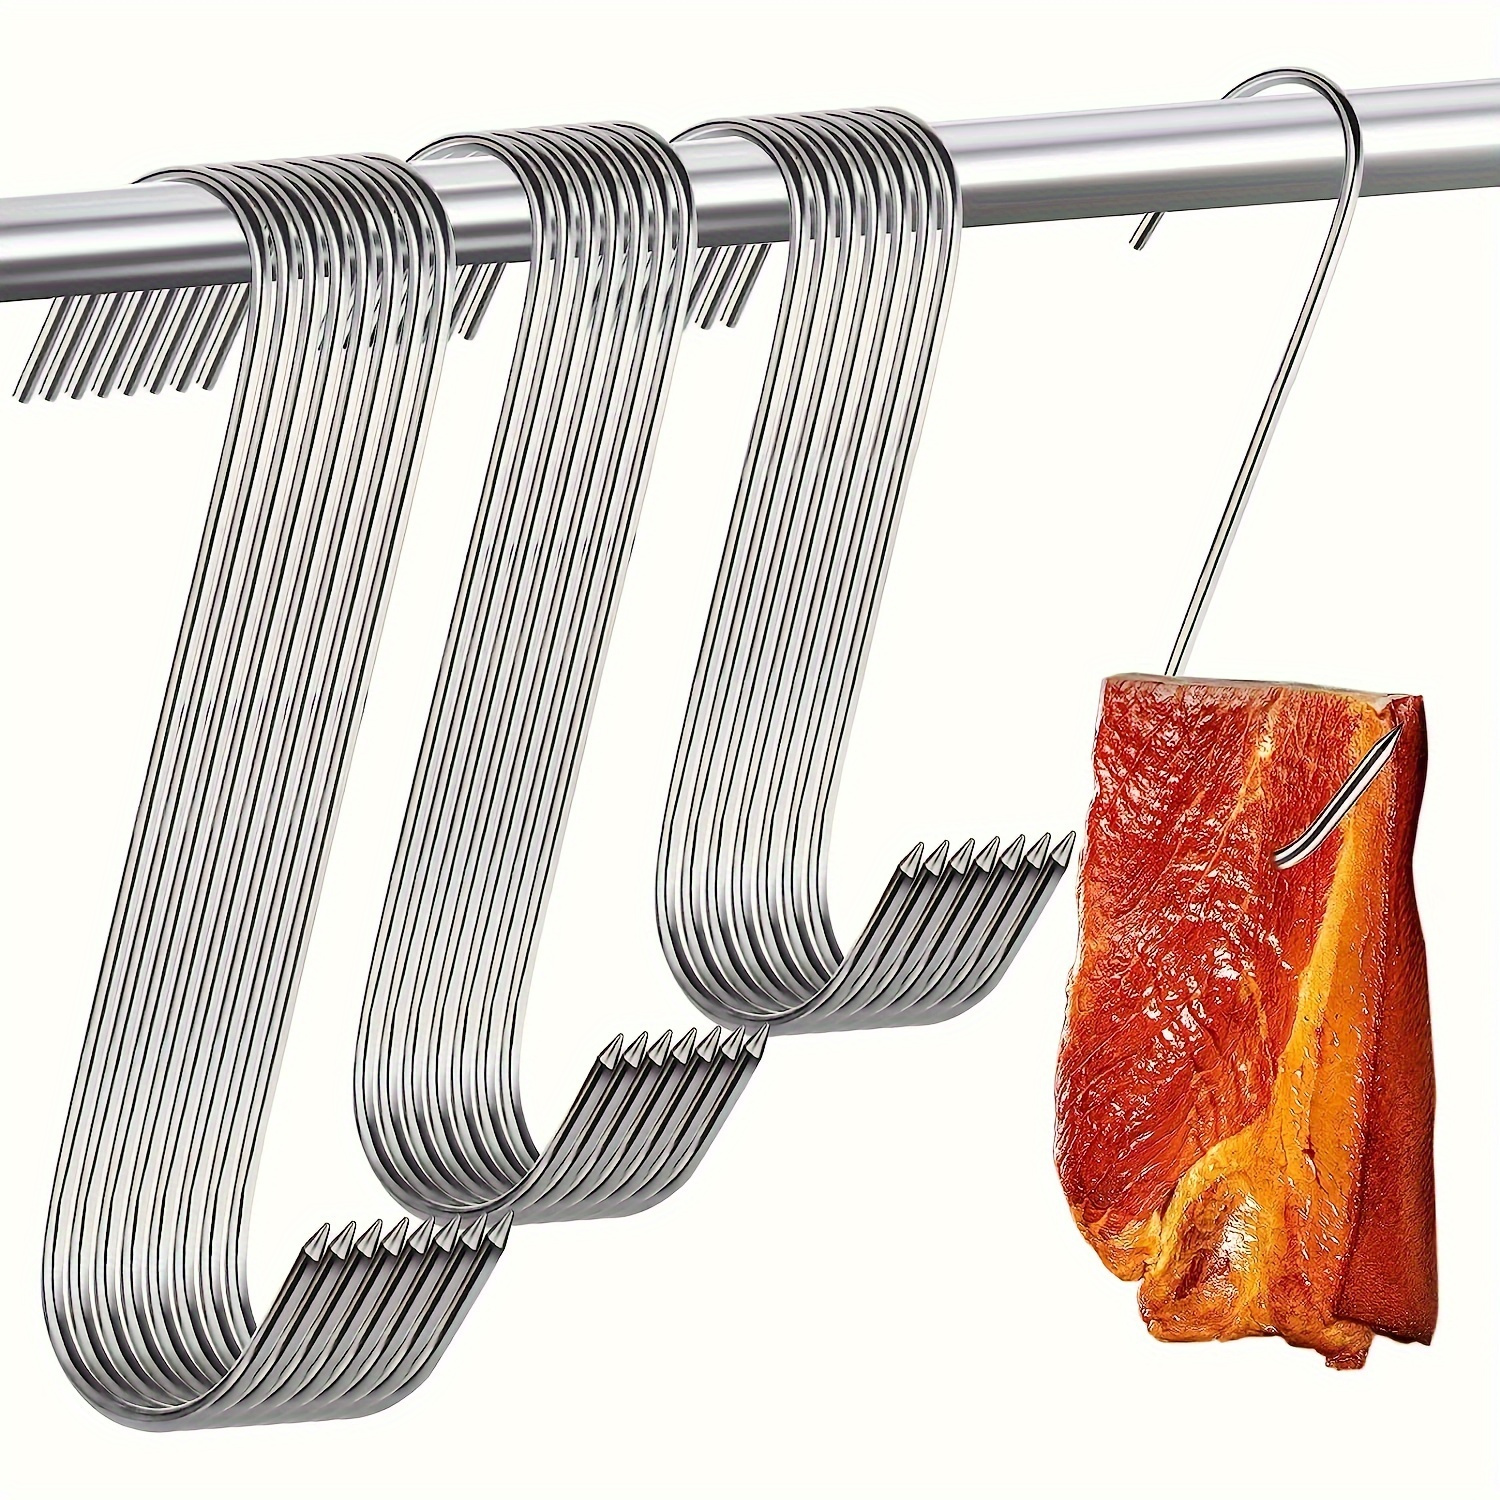 6/12pcs, Meat Hooks, Heavy Duty Stainless Steel S Hooks, Butcher Hanging  Meat Hook, S Hooks For Storage Shelves And Metal Hanger For Hanging On  Kitche